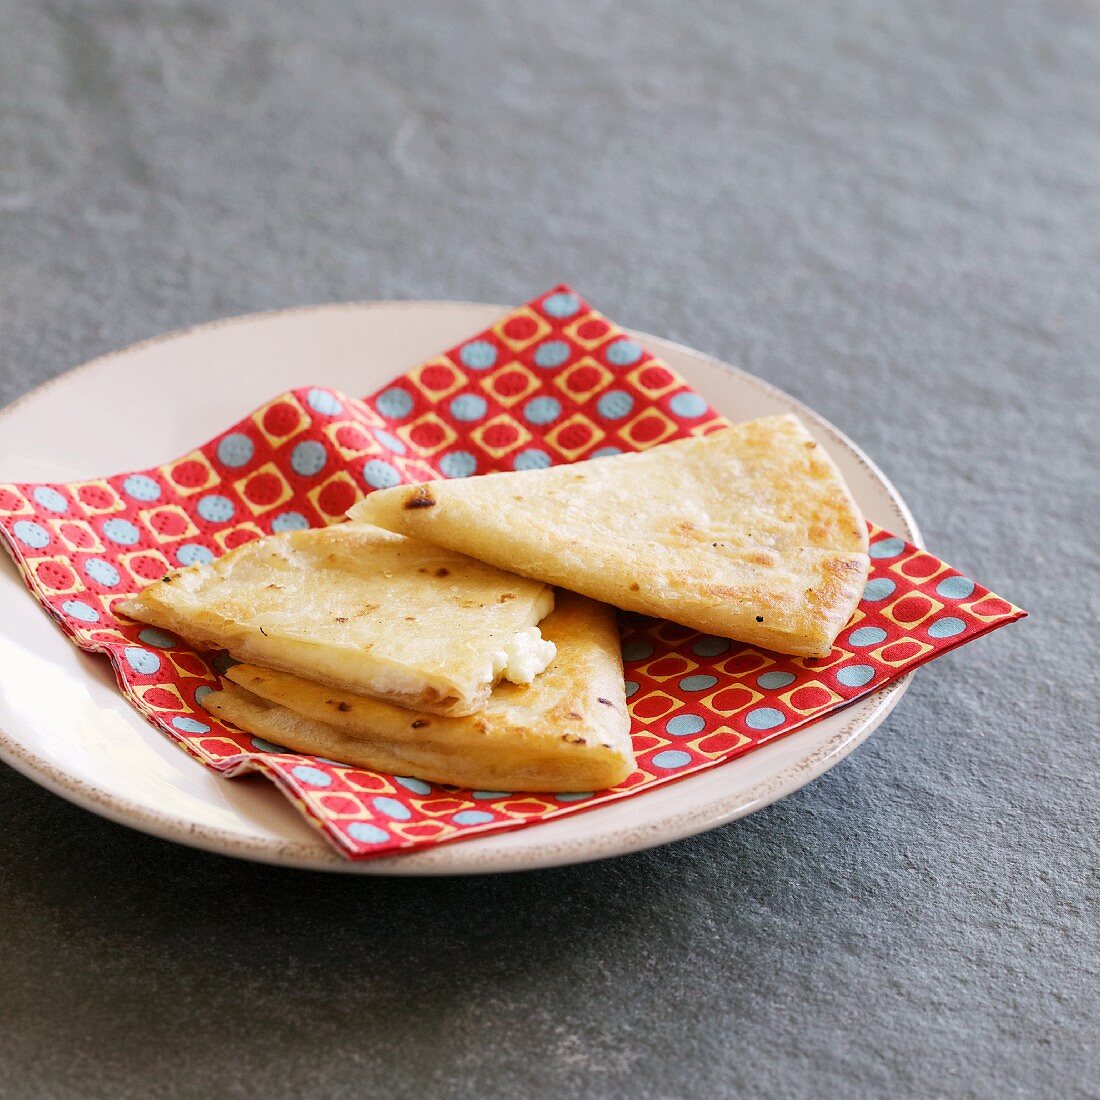 Quesadillas (tortillas filled with cheese, Mexico)